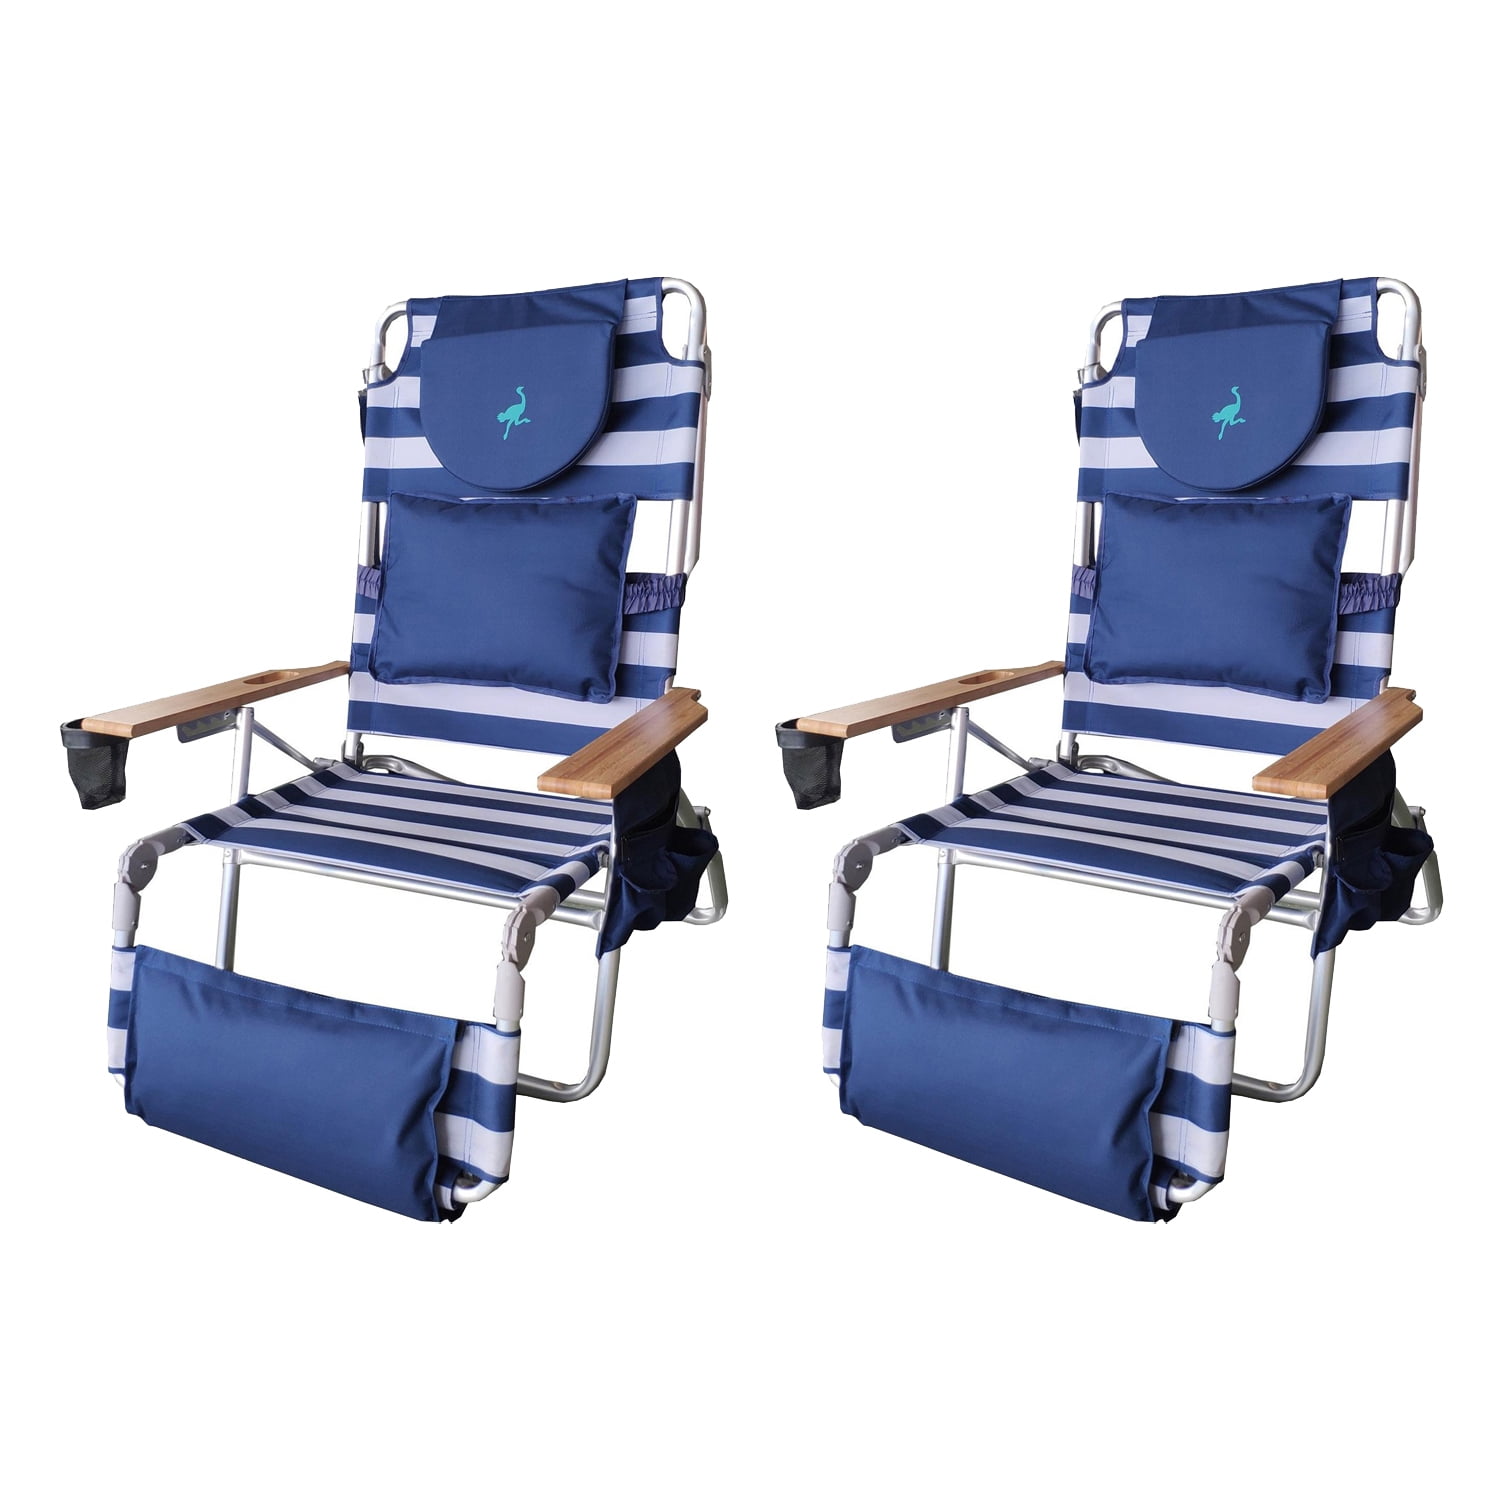 Ostrich Deluxe Padded 3-N-1 Outdoor Lounge Reclining Beach Chair Striped Blue 